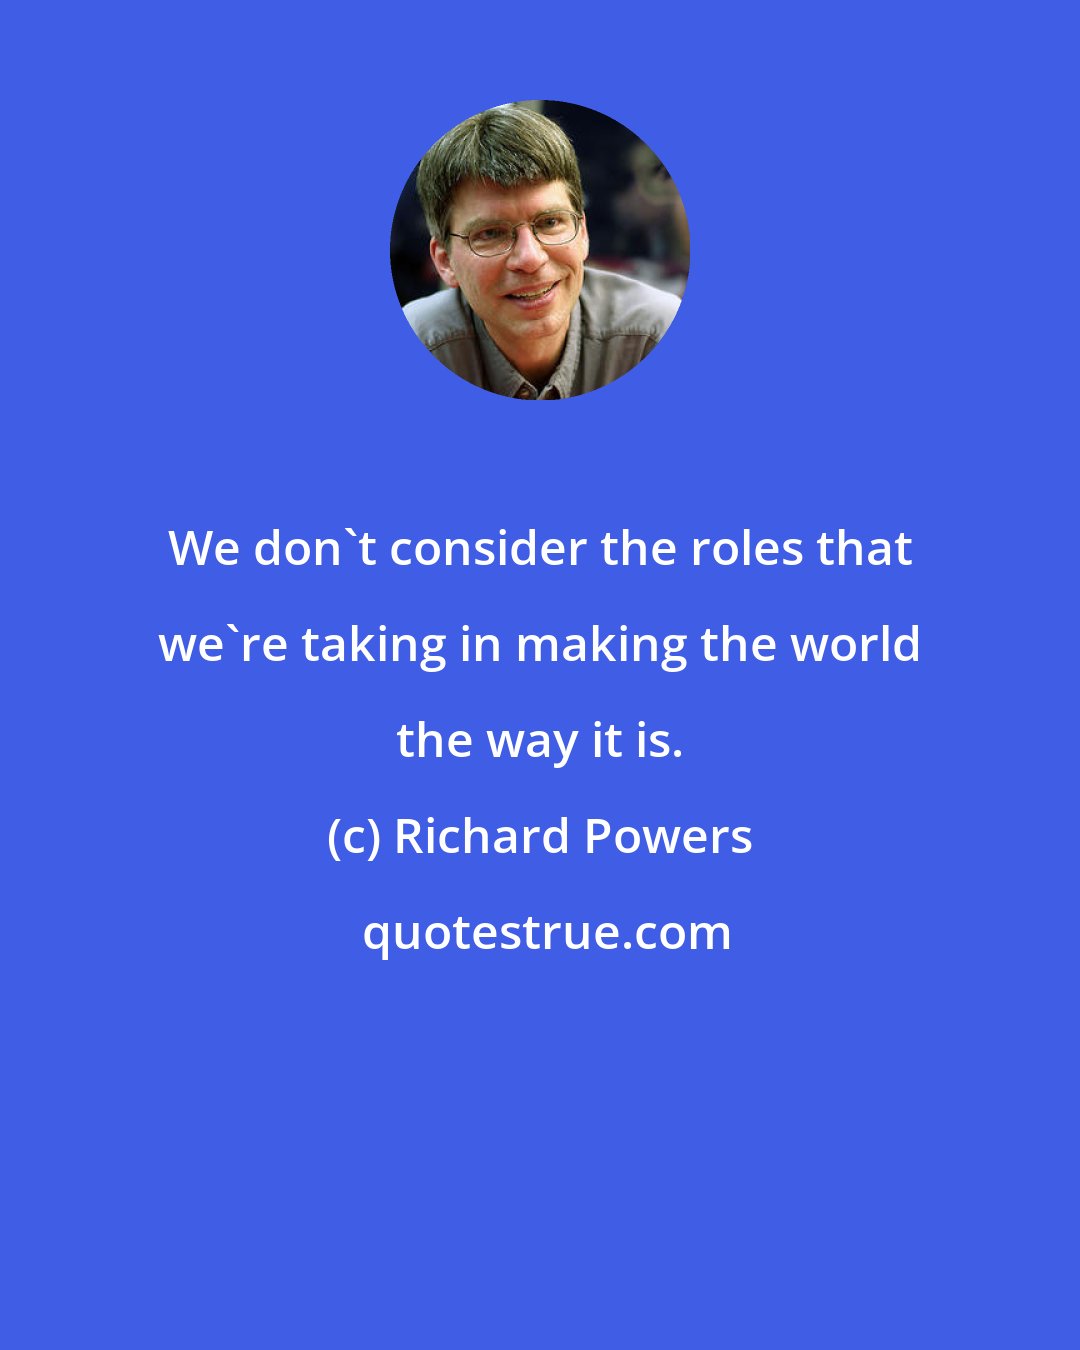 Richard Powers: We don't consider the roles that we're taking in making the world the way it is.